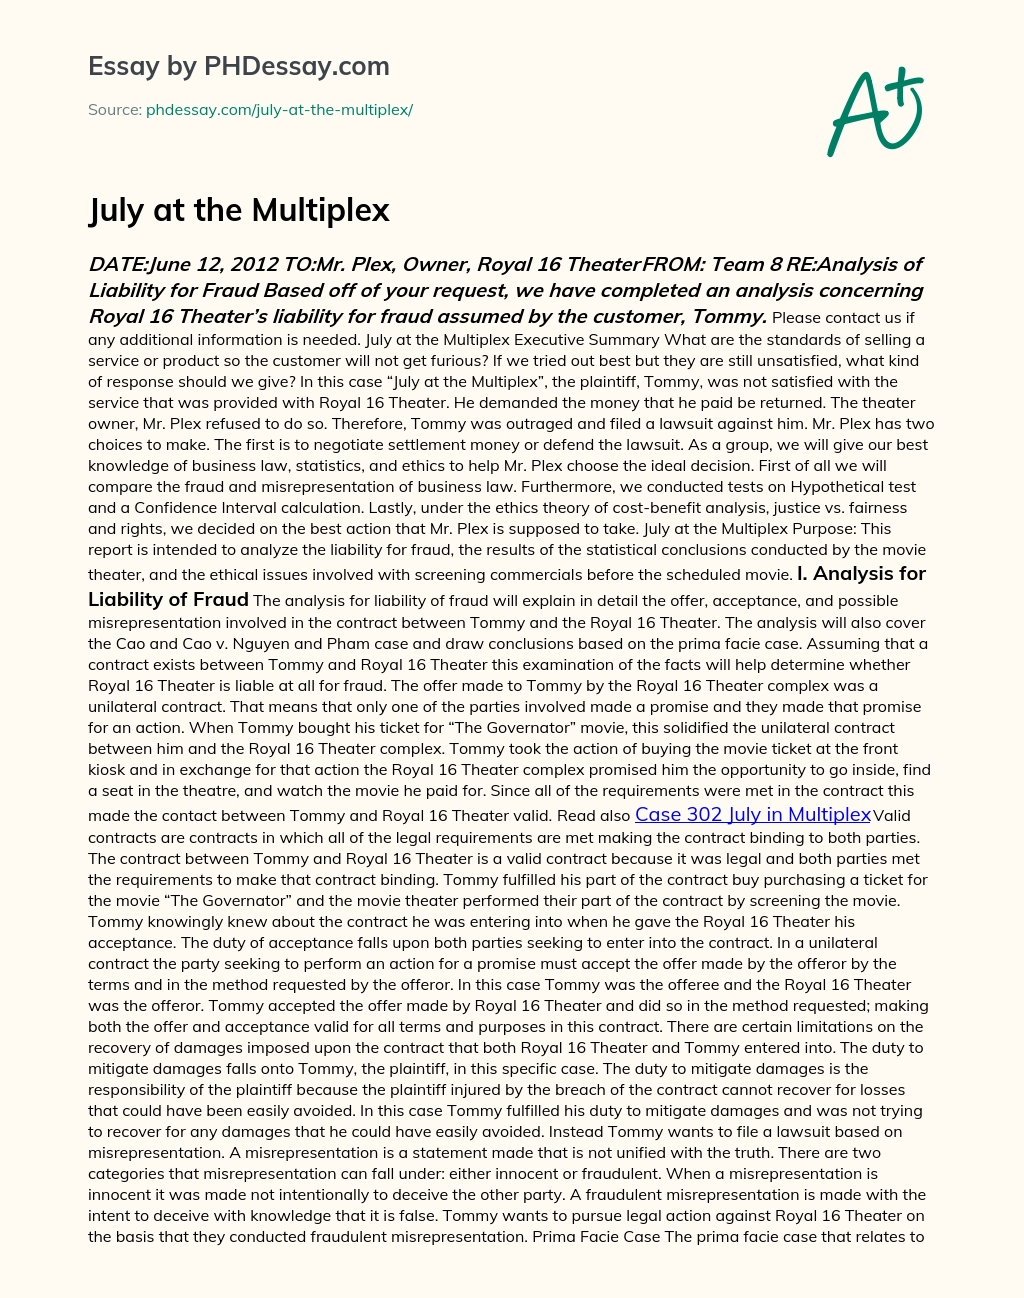 July at the Multiplex essay